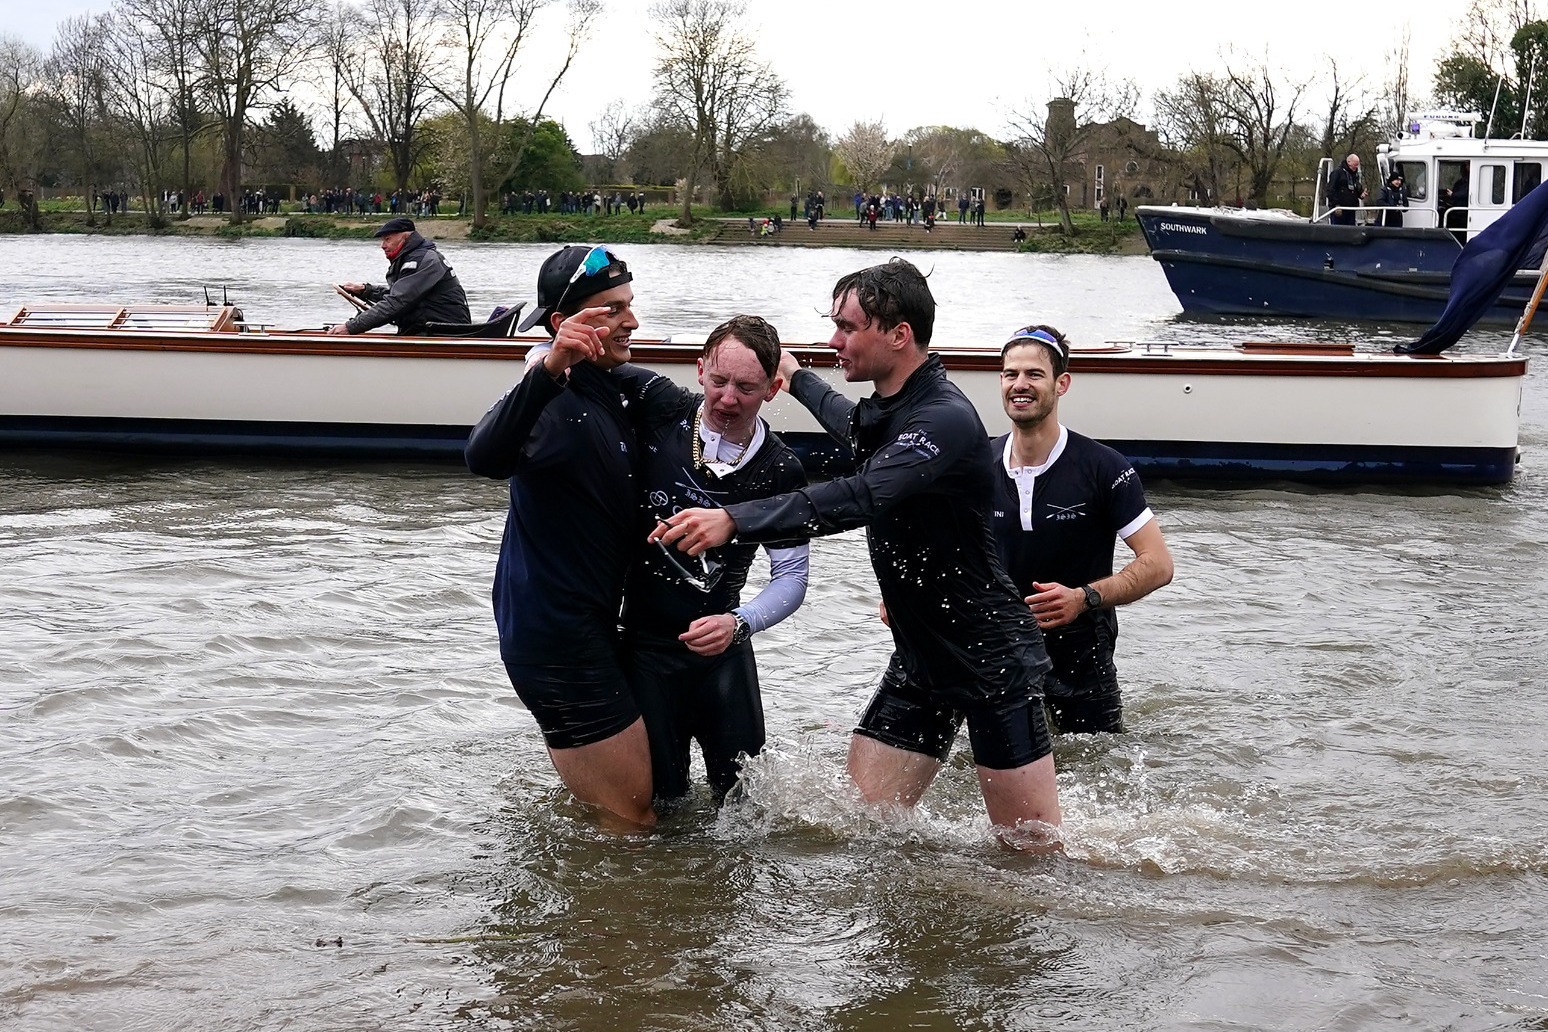 Oxford overcome Cambridge to win men’s Boat Race for first time since 2017 